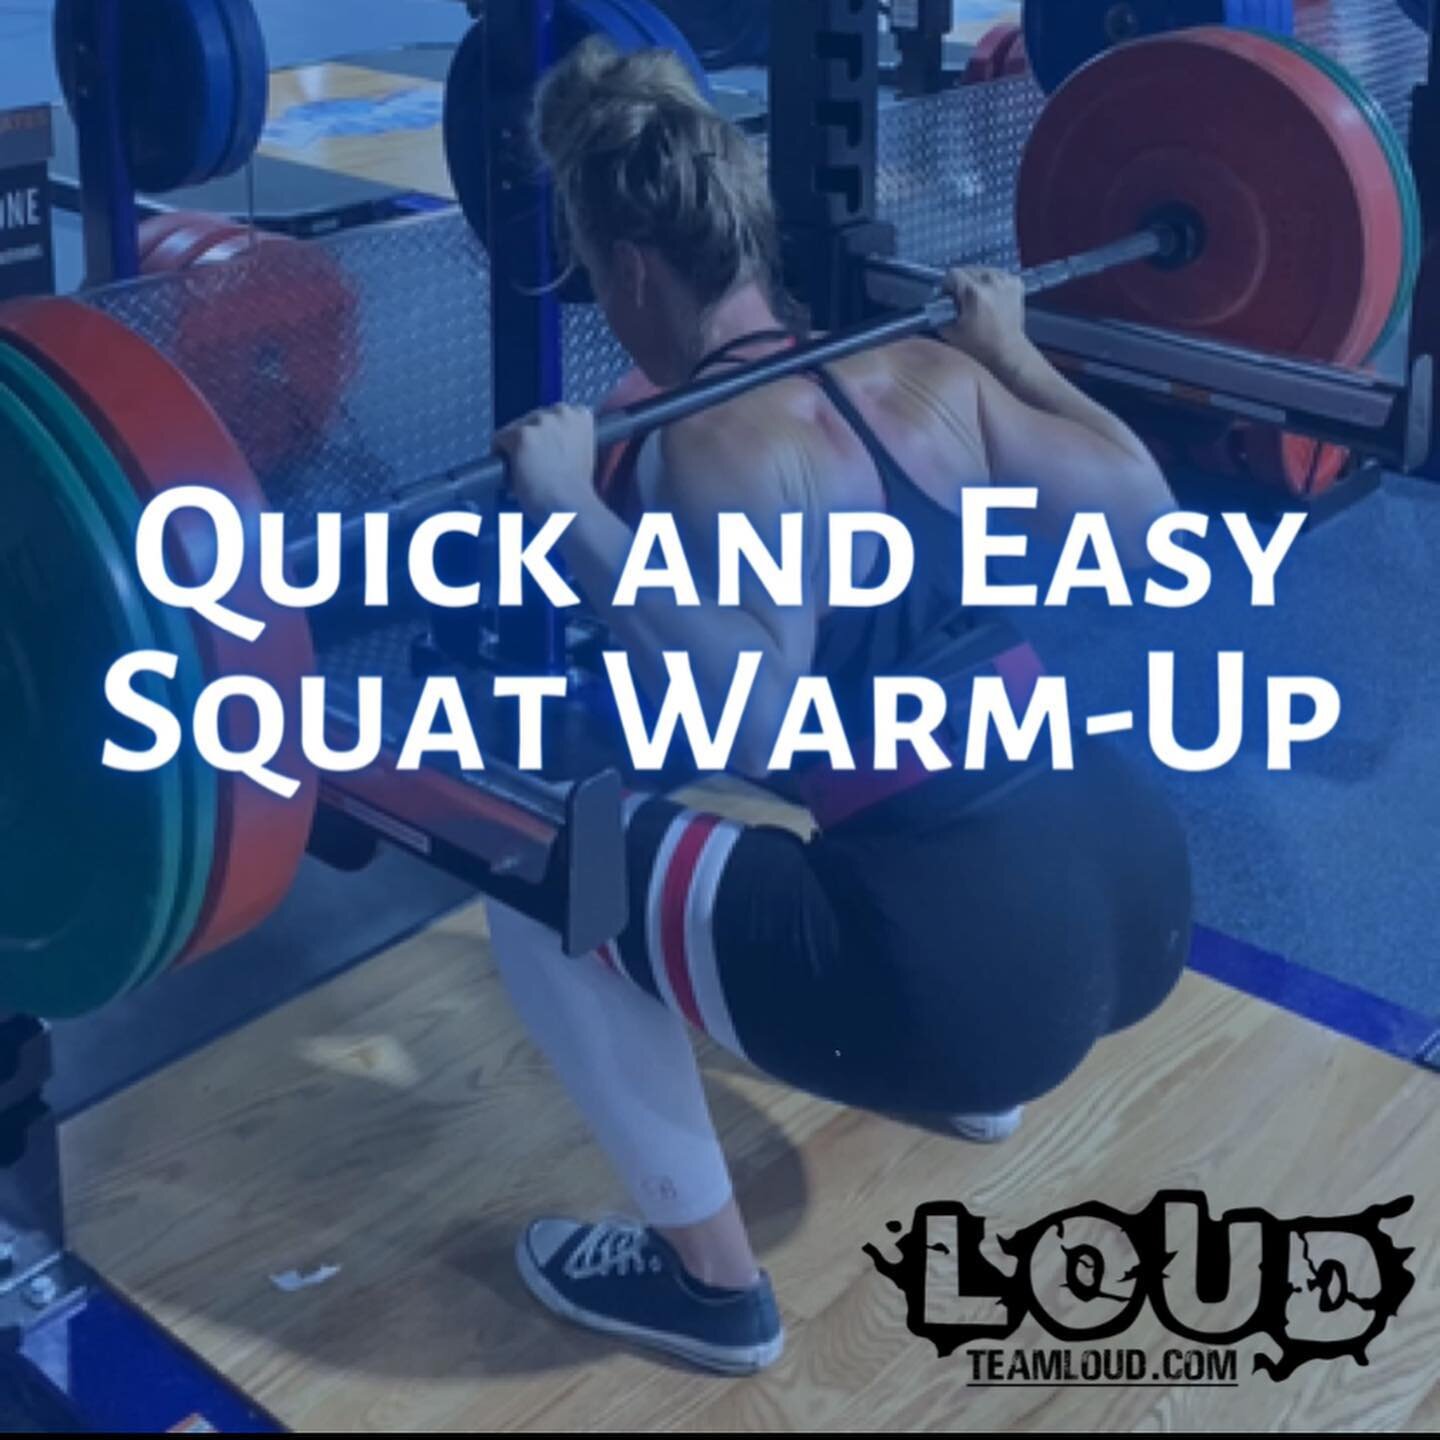 Quick &amp; Easy Squat or Lower Body Warm-up‼️ Save this for your next leg day!
➖
Before hitting the heavy weights, a proper warm up is key. Warm muscles are strong muscles💪
➖
🔹Start with 5 minutes of light to moderate cardio to get the blood flowi